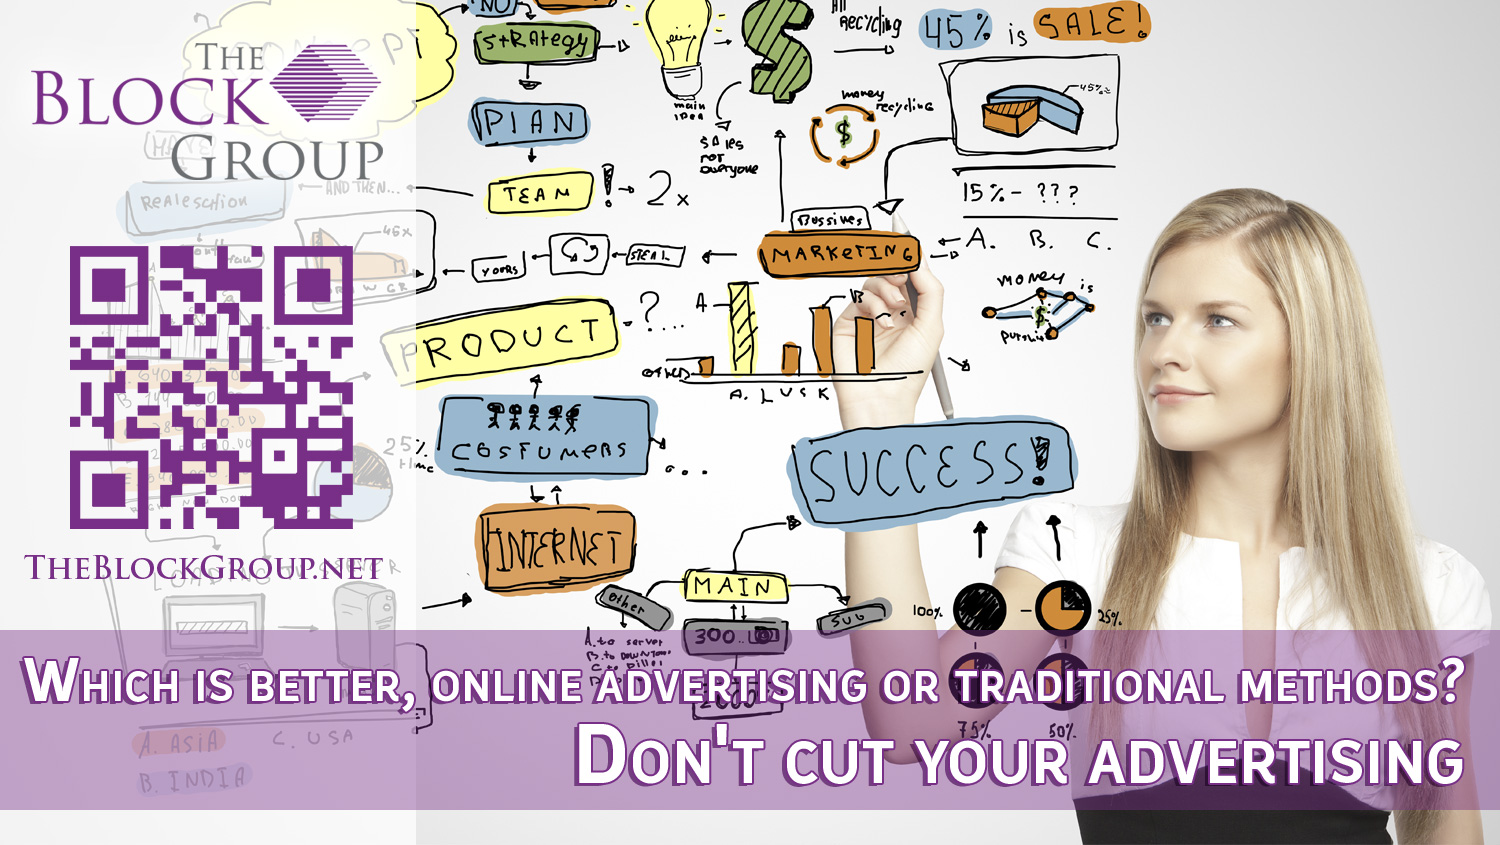 029-Dont-cut-your-advertising